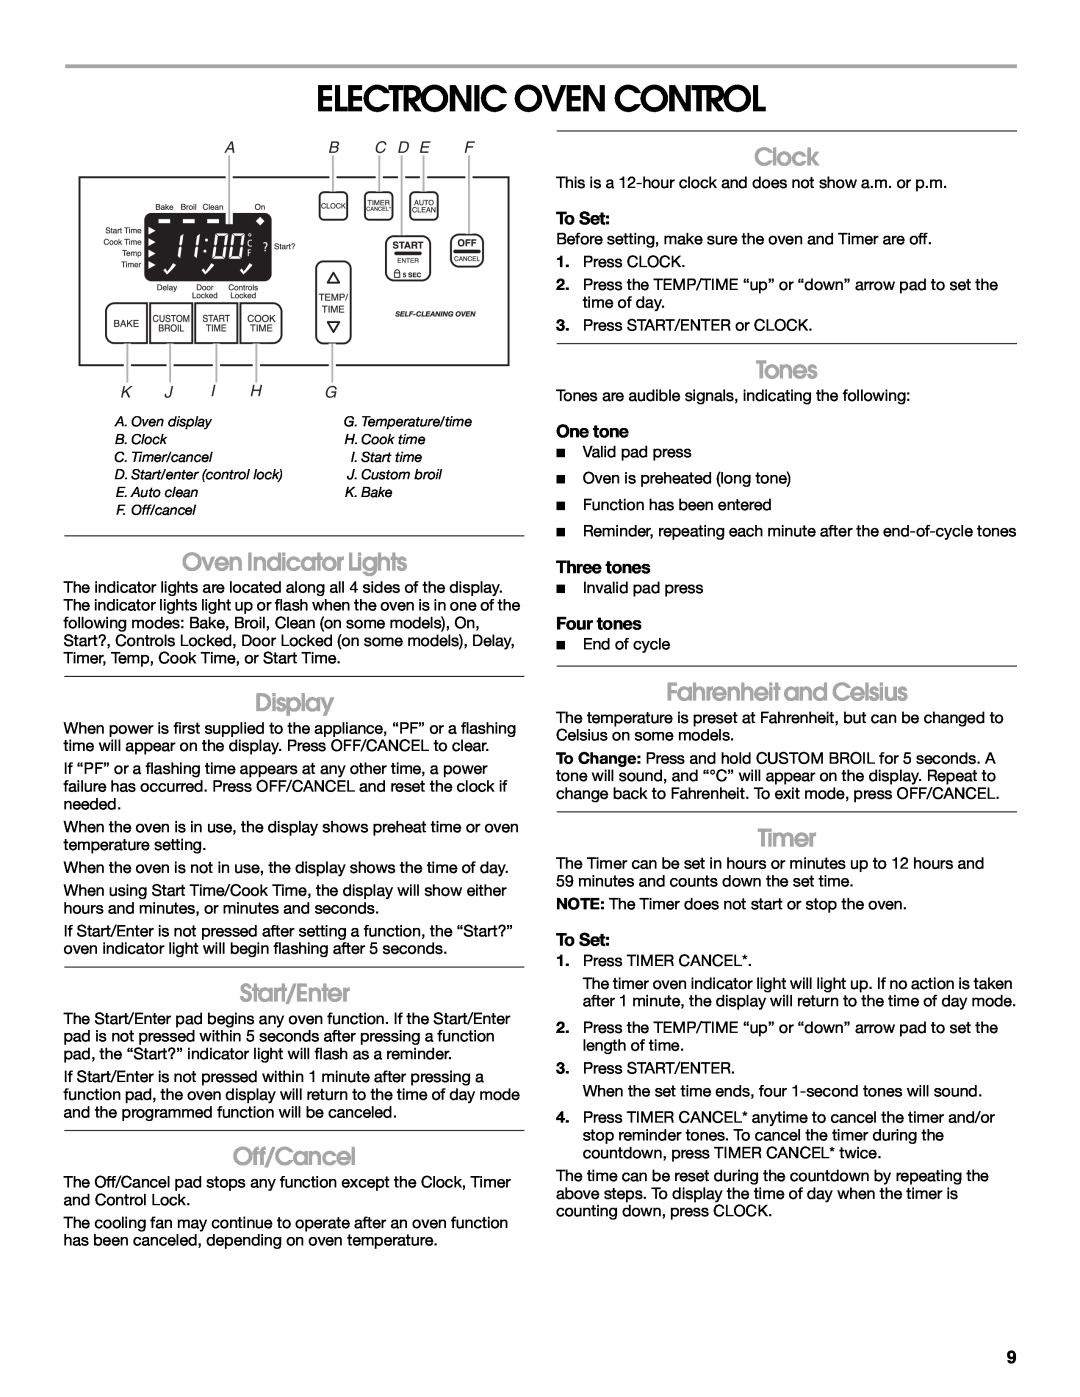 Whirlpool W10017720 Electronic Oven Control, Clock, Oven Indicator Lights, Display, Start/Enter, Off/Cancel, Tones, Timer 